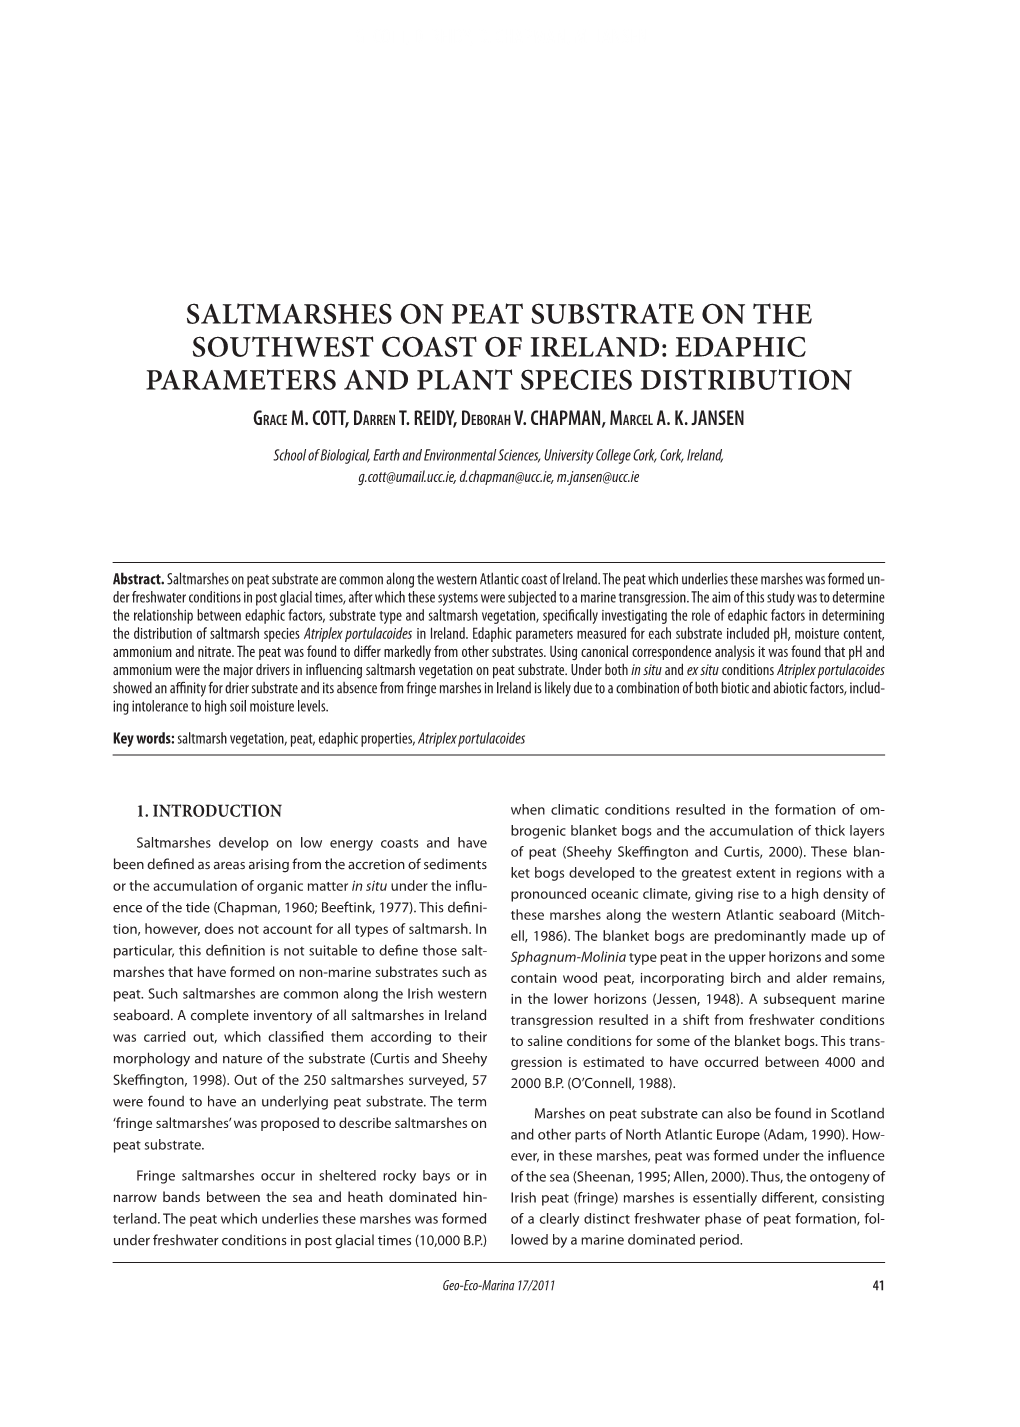 Saltmarshes on Peat Substrate on the Southwest Coast of Ireland: Edaphic Parameters and Plant Species Distribution Grace M